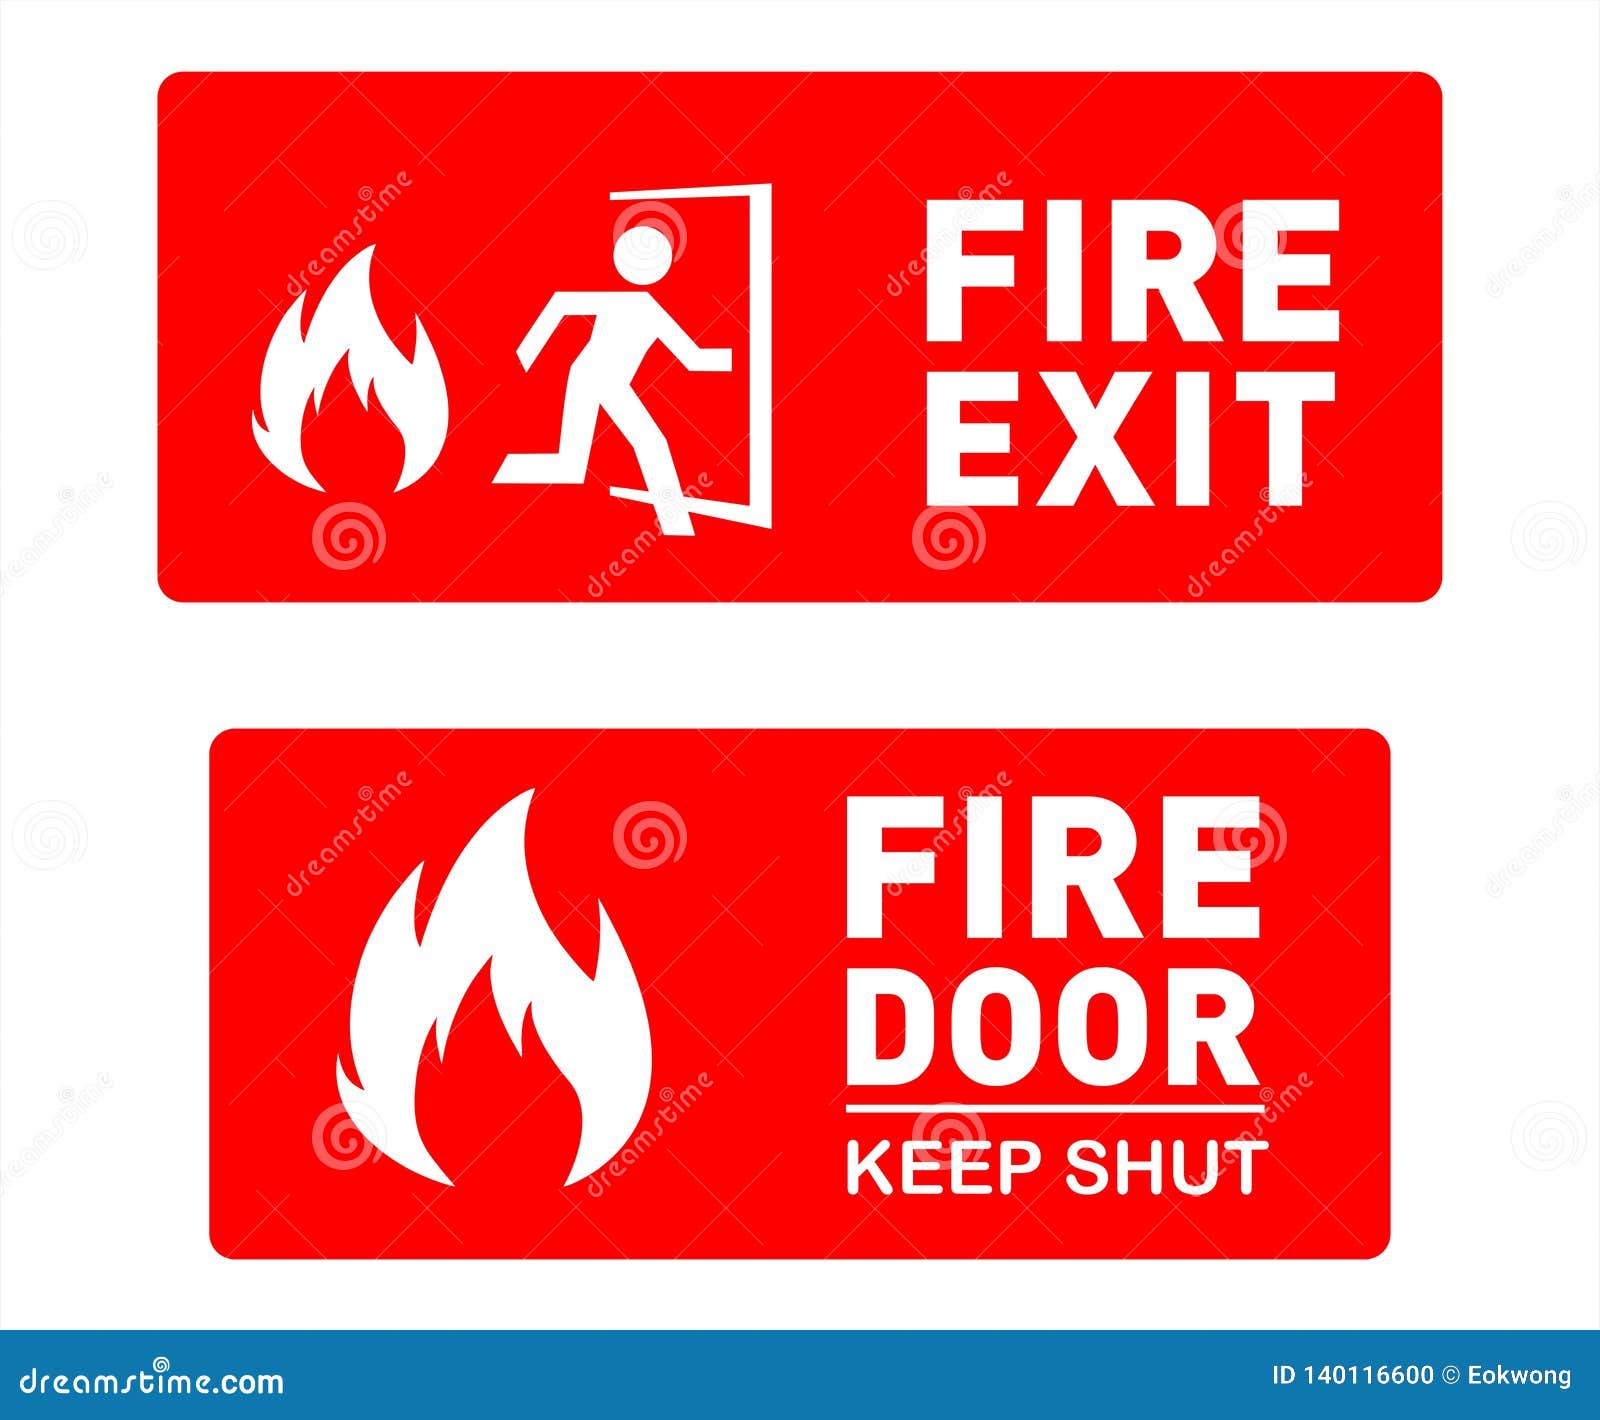 Fire Exit Sign Template Designs Printable Safety Signs And Symbols Stock Vector Illustration Of Poster Emergency 140116600